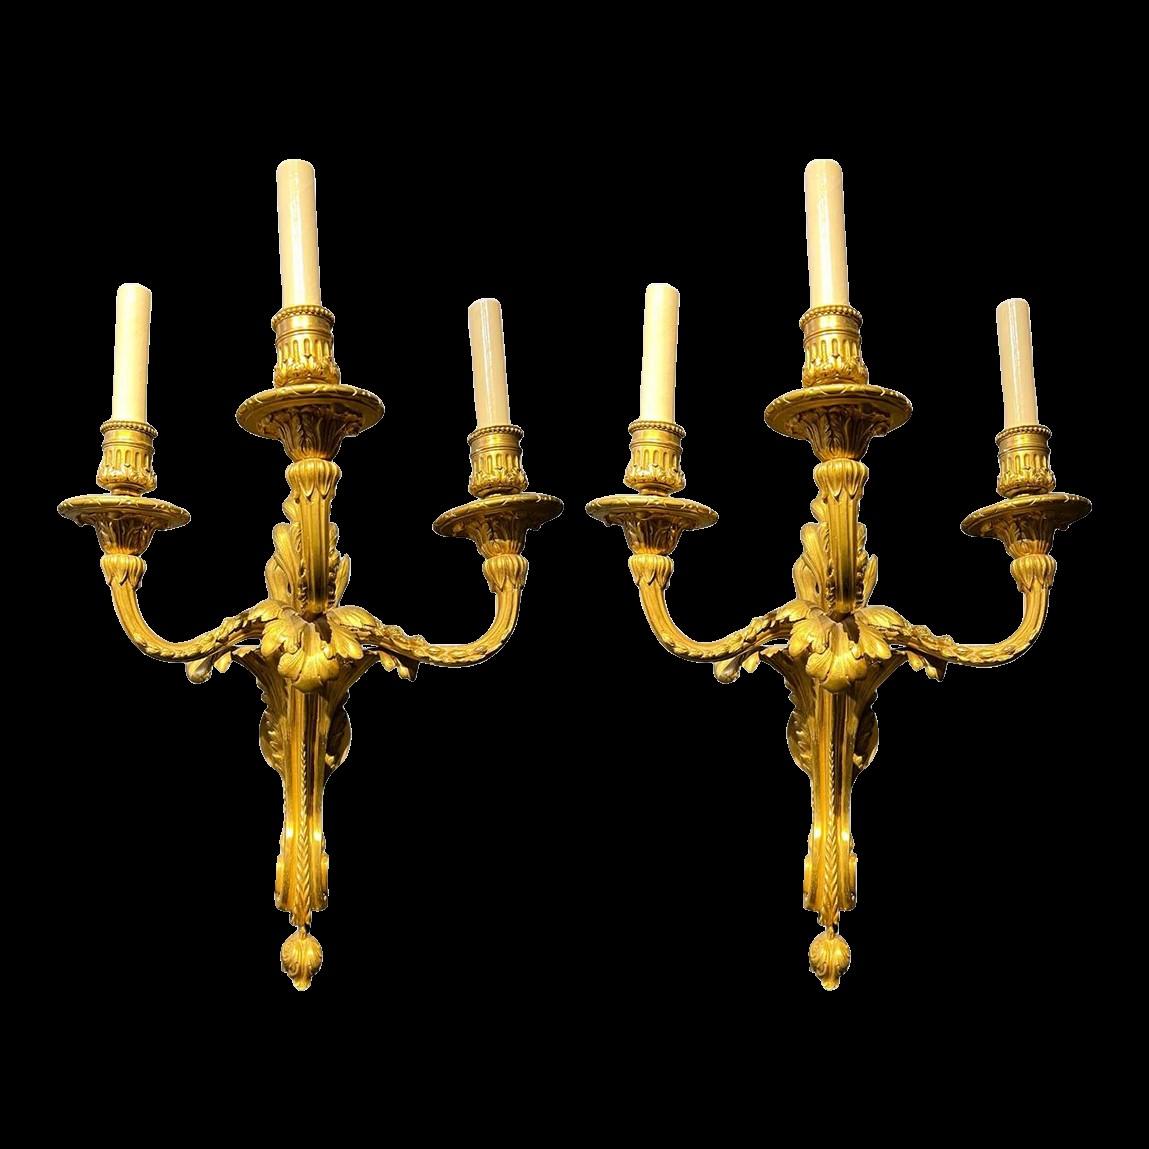 A pair of circa 1920's large gilt bronze 3 lights sconces with Acanthus leaves design.